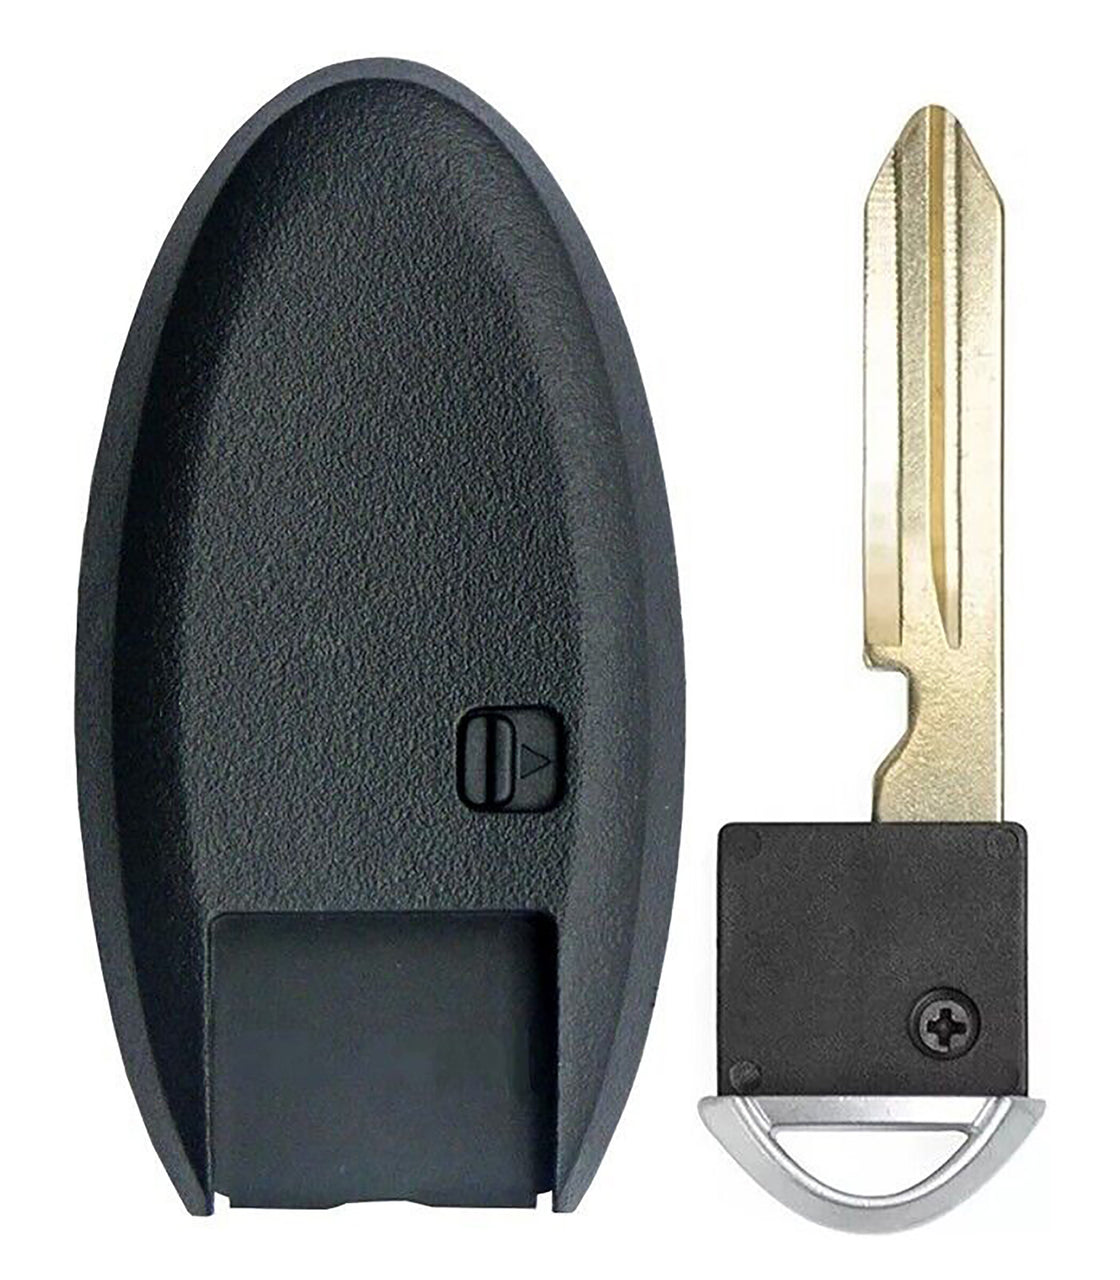 1x New Replacement Proximity Key Fob Compatible with & Fit For Nissan Vehicle. Read Description - MPN KR5TXN4-02